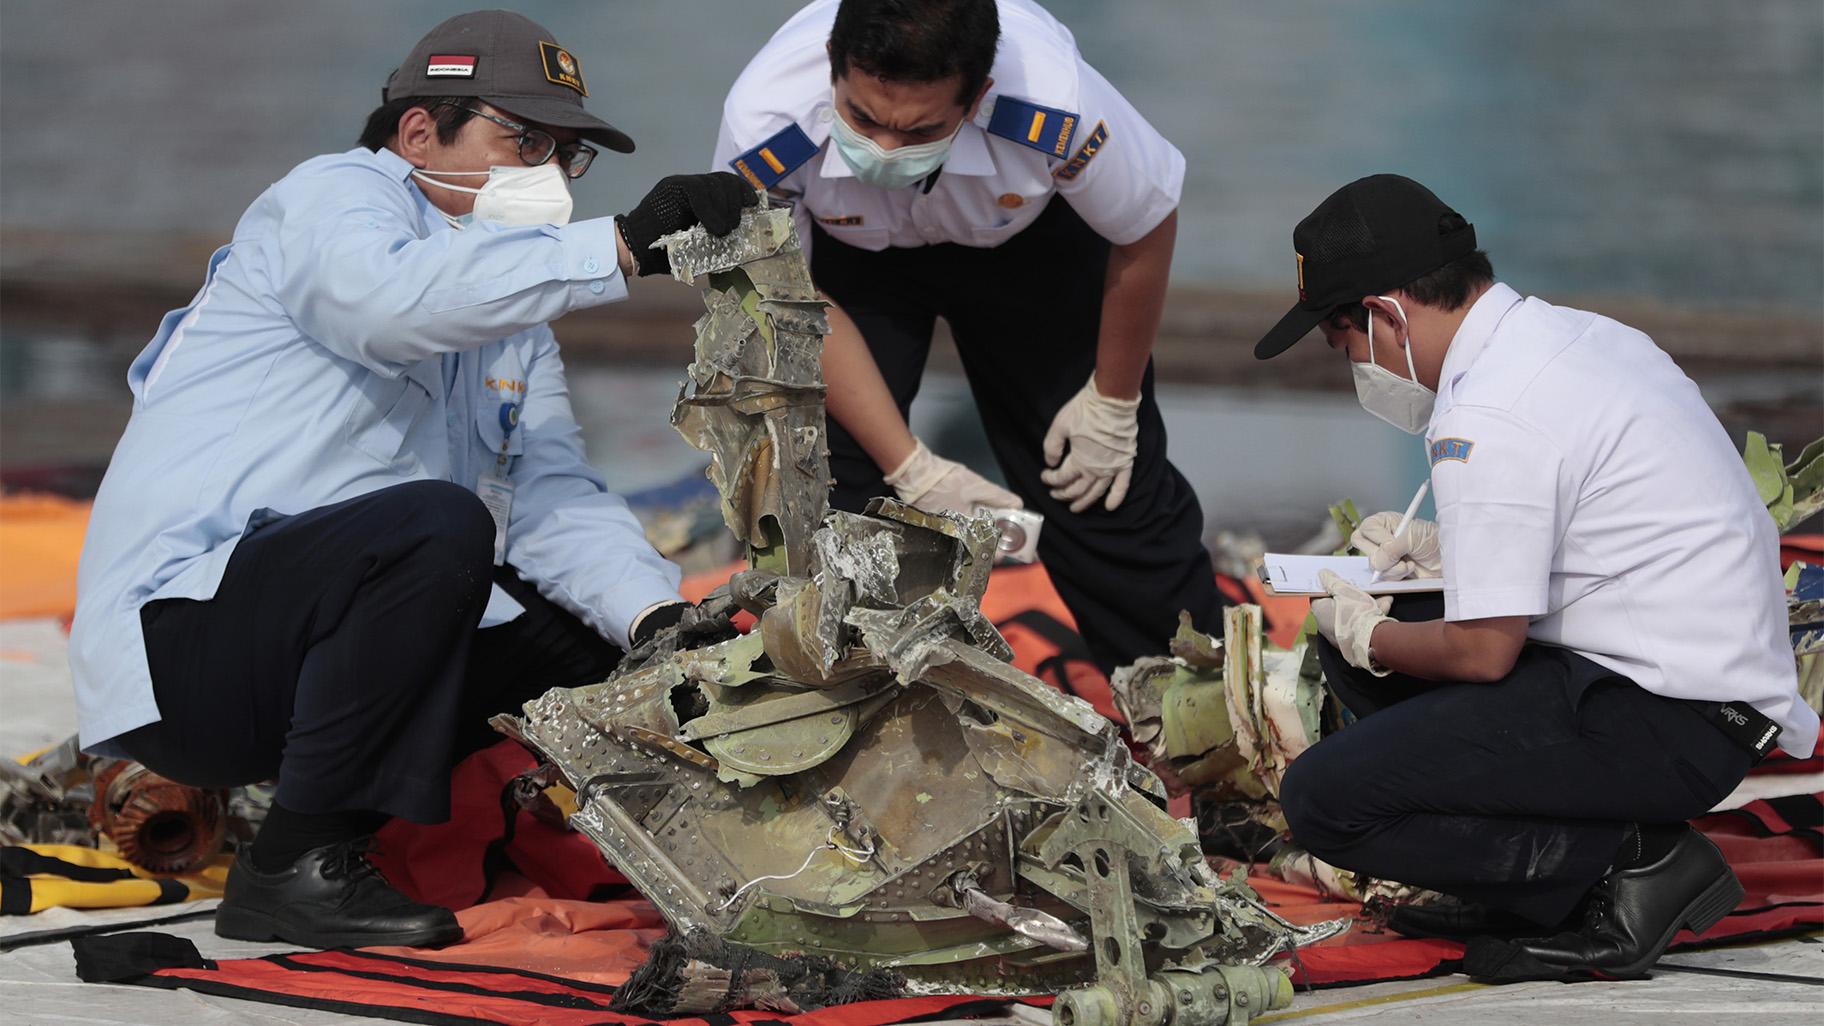 In this Jan. 21, 2021, file photo, investigators inspect a pieces of the Sriwijaya Air flight SJ-182 retrieved from the Java Sea where the passenger jet crashed on Jan. 9, at Tanjung Priok Port in Jakarta, Indonesia. A lawsuit filed in Seattle against Boeing alleges a malfunctioning autothrottle system on the older 737 jet led to the January crash of the Sriwijaya Air flight that killed all 62 people on board. (AP Photo / Dita Alangkara, File)